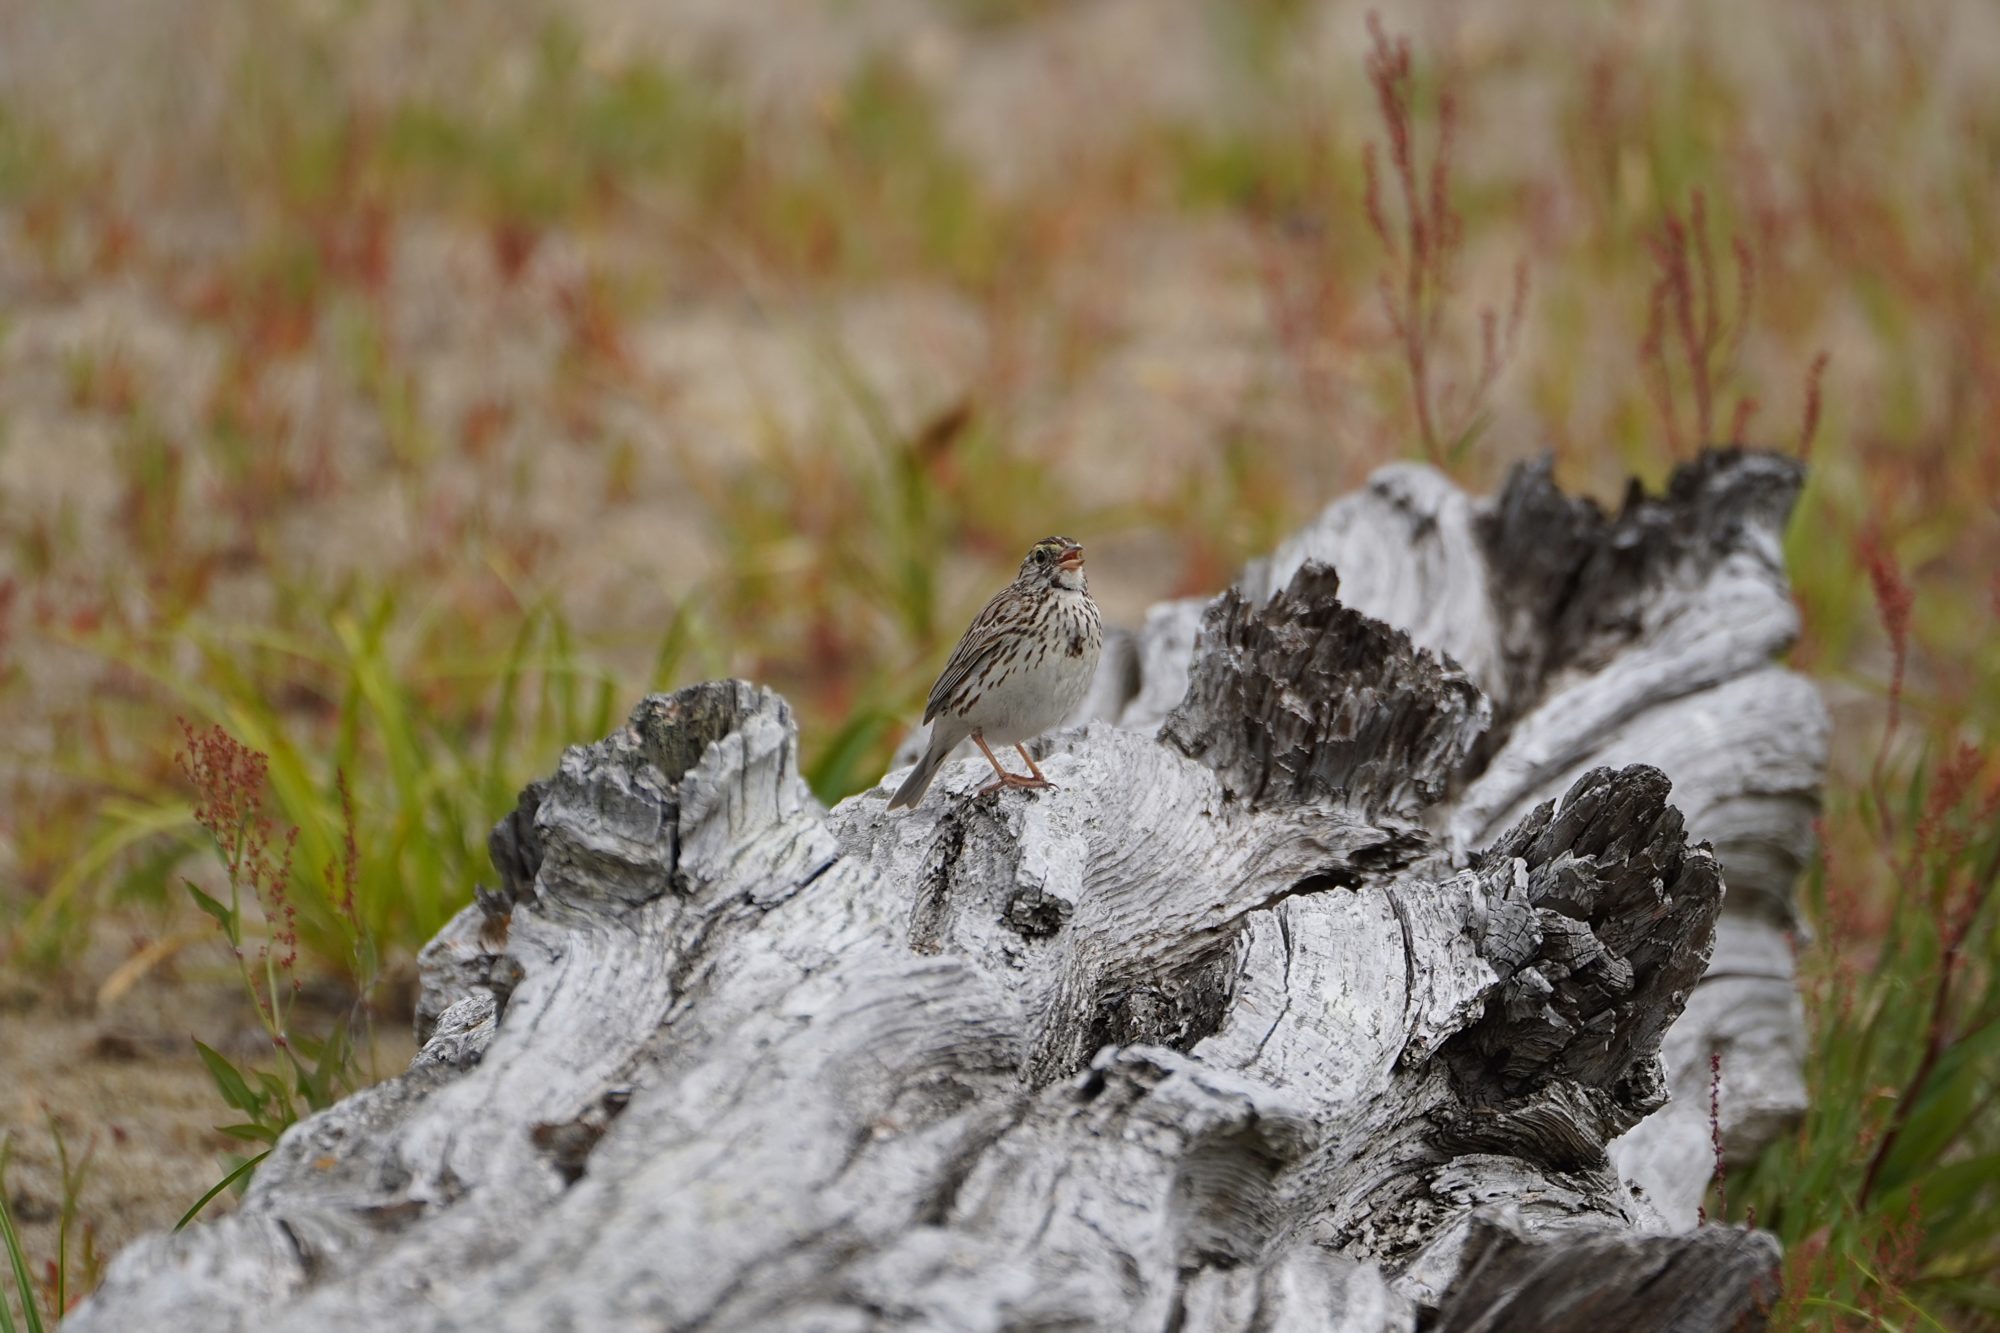 A Savannah Sparrow sitting on a log and singing. Its plumage lets it blend in really well.